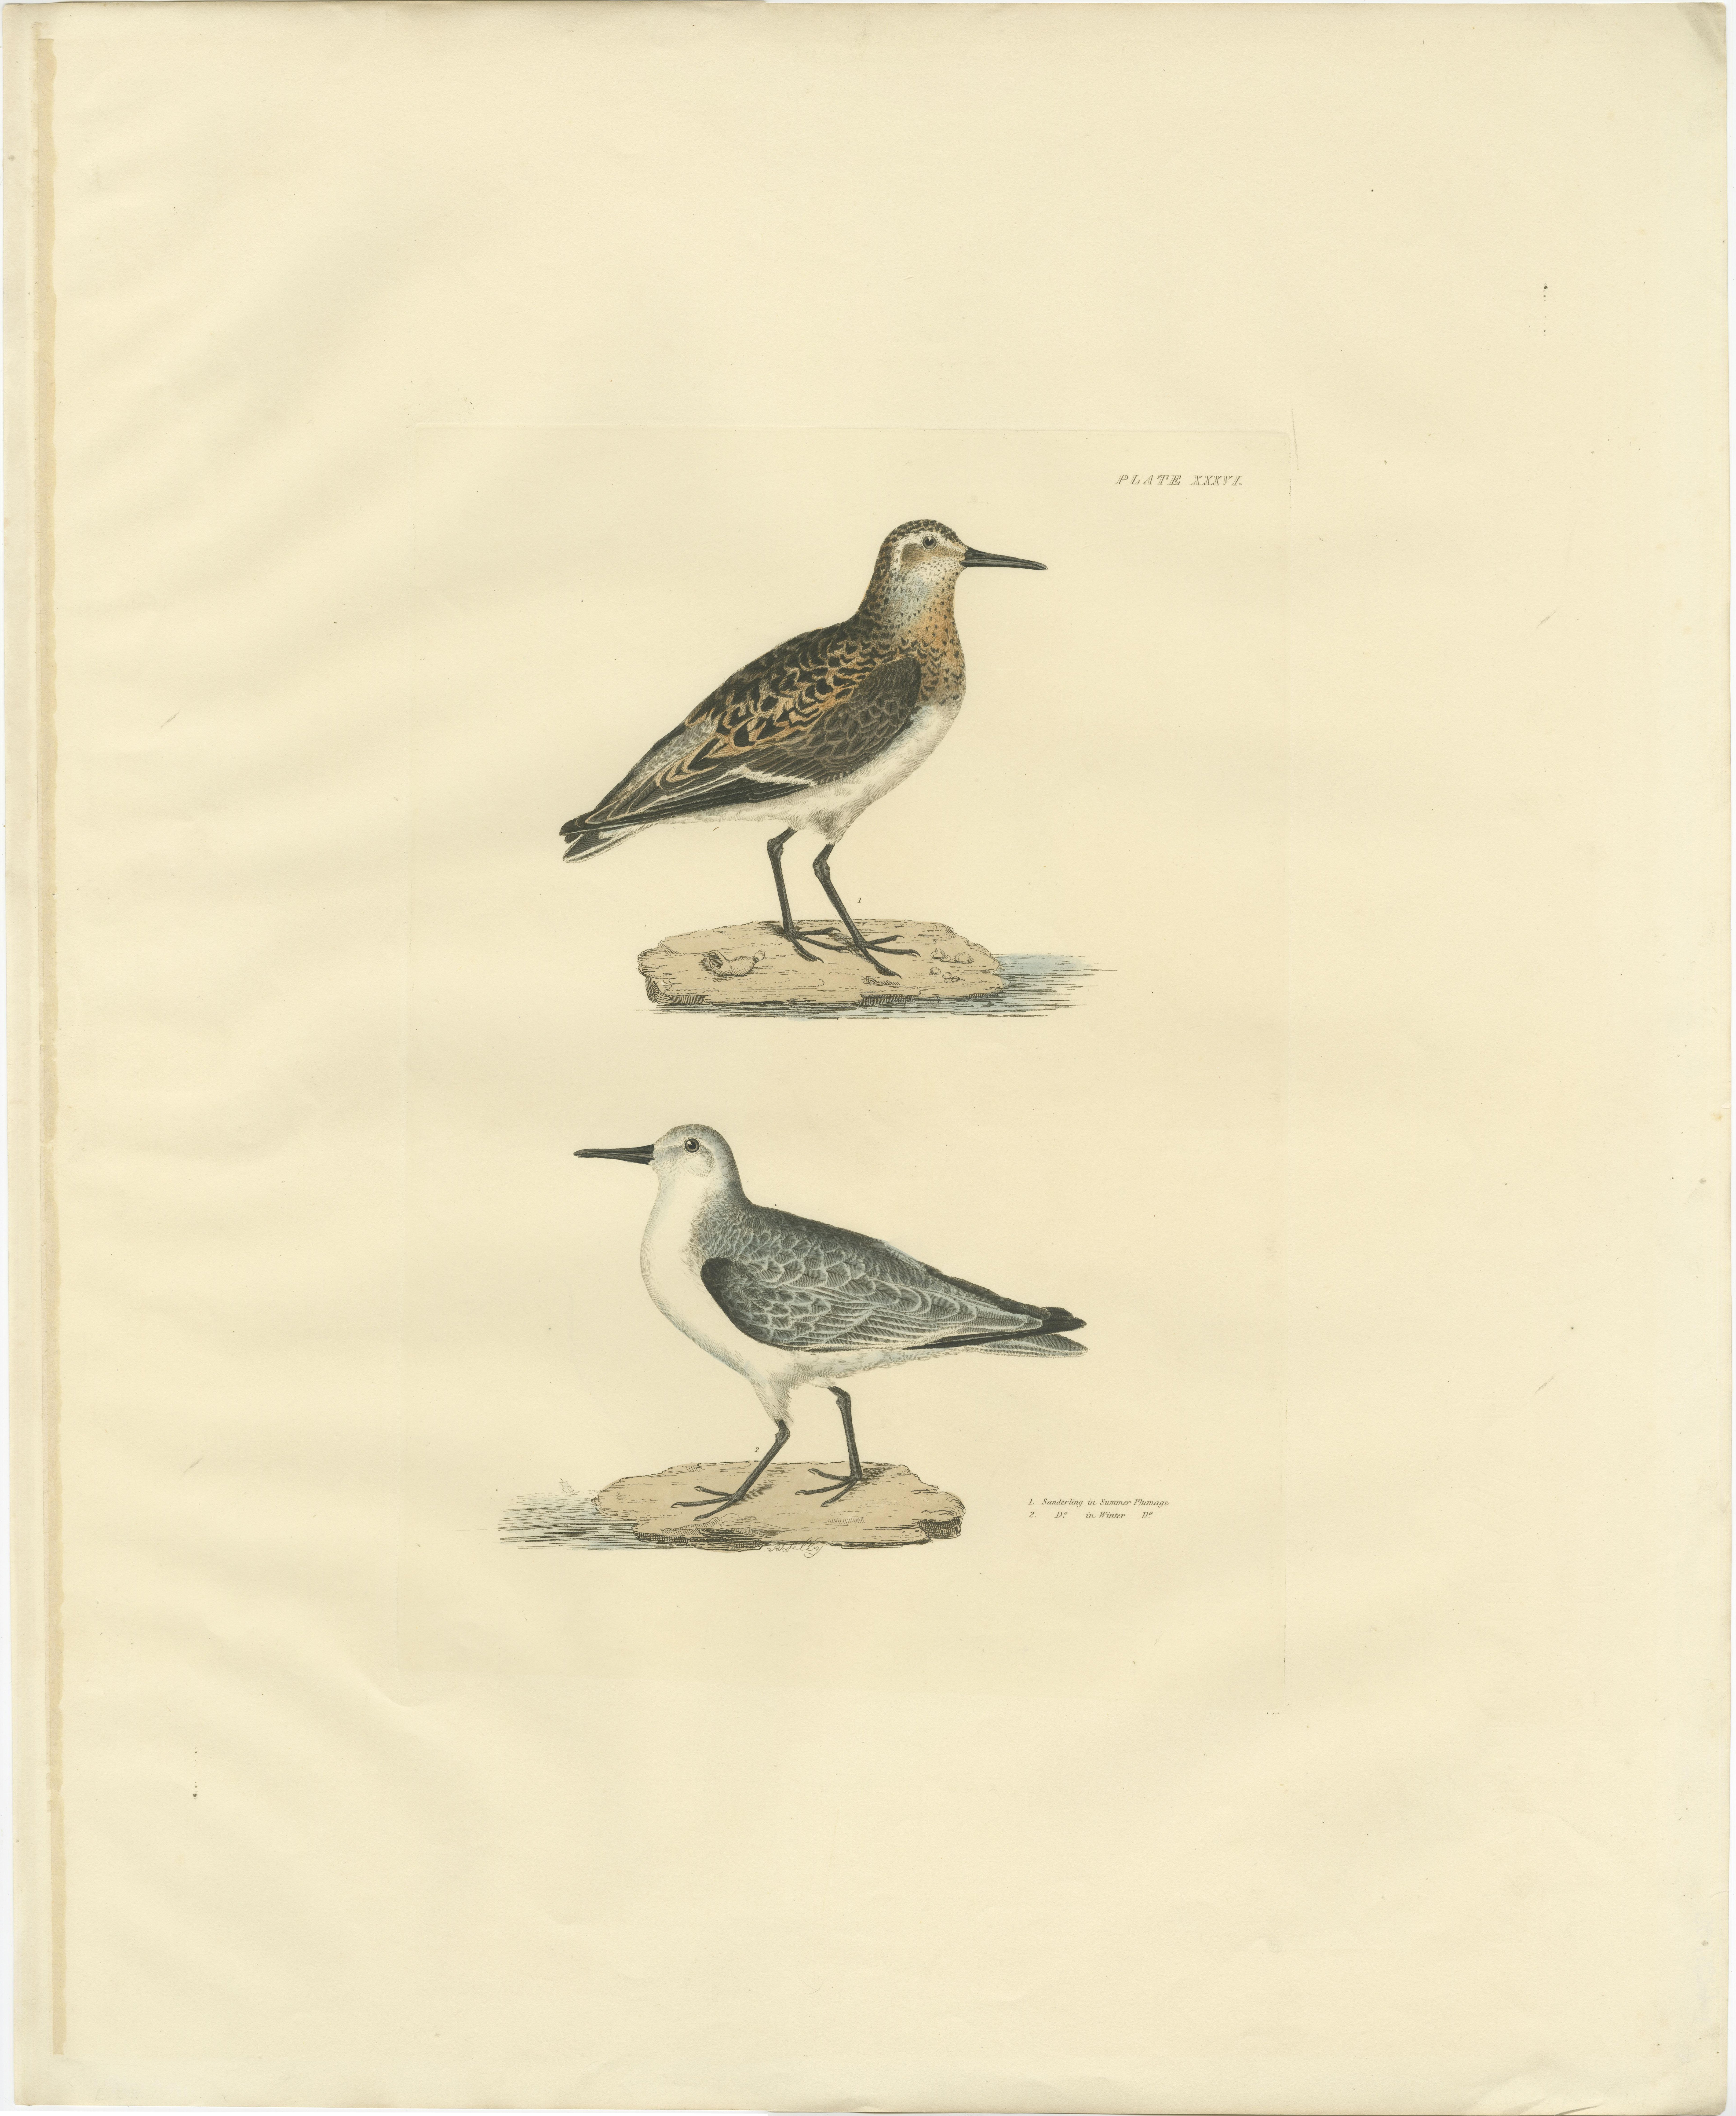 Large original antique print with two illustrations of birds, which are finely detailed and colored, from a series of ornithological studies. The print is engraved with the signature of Selby.  This print is from the  